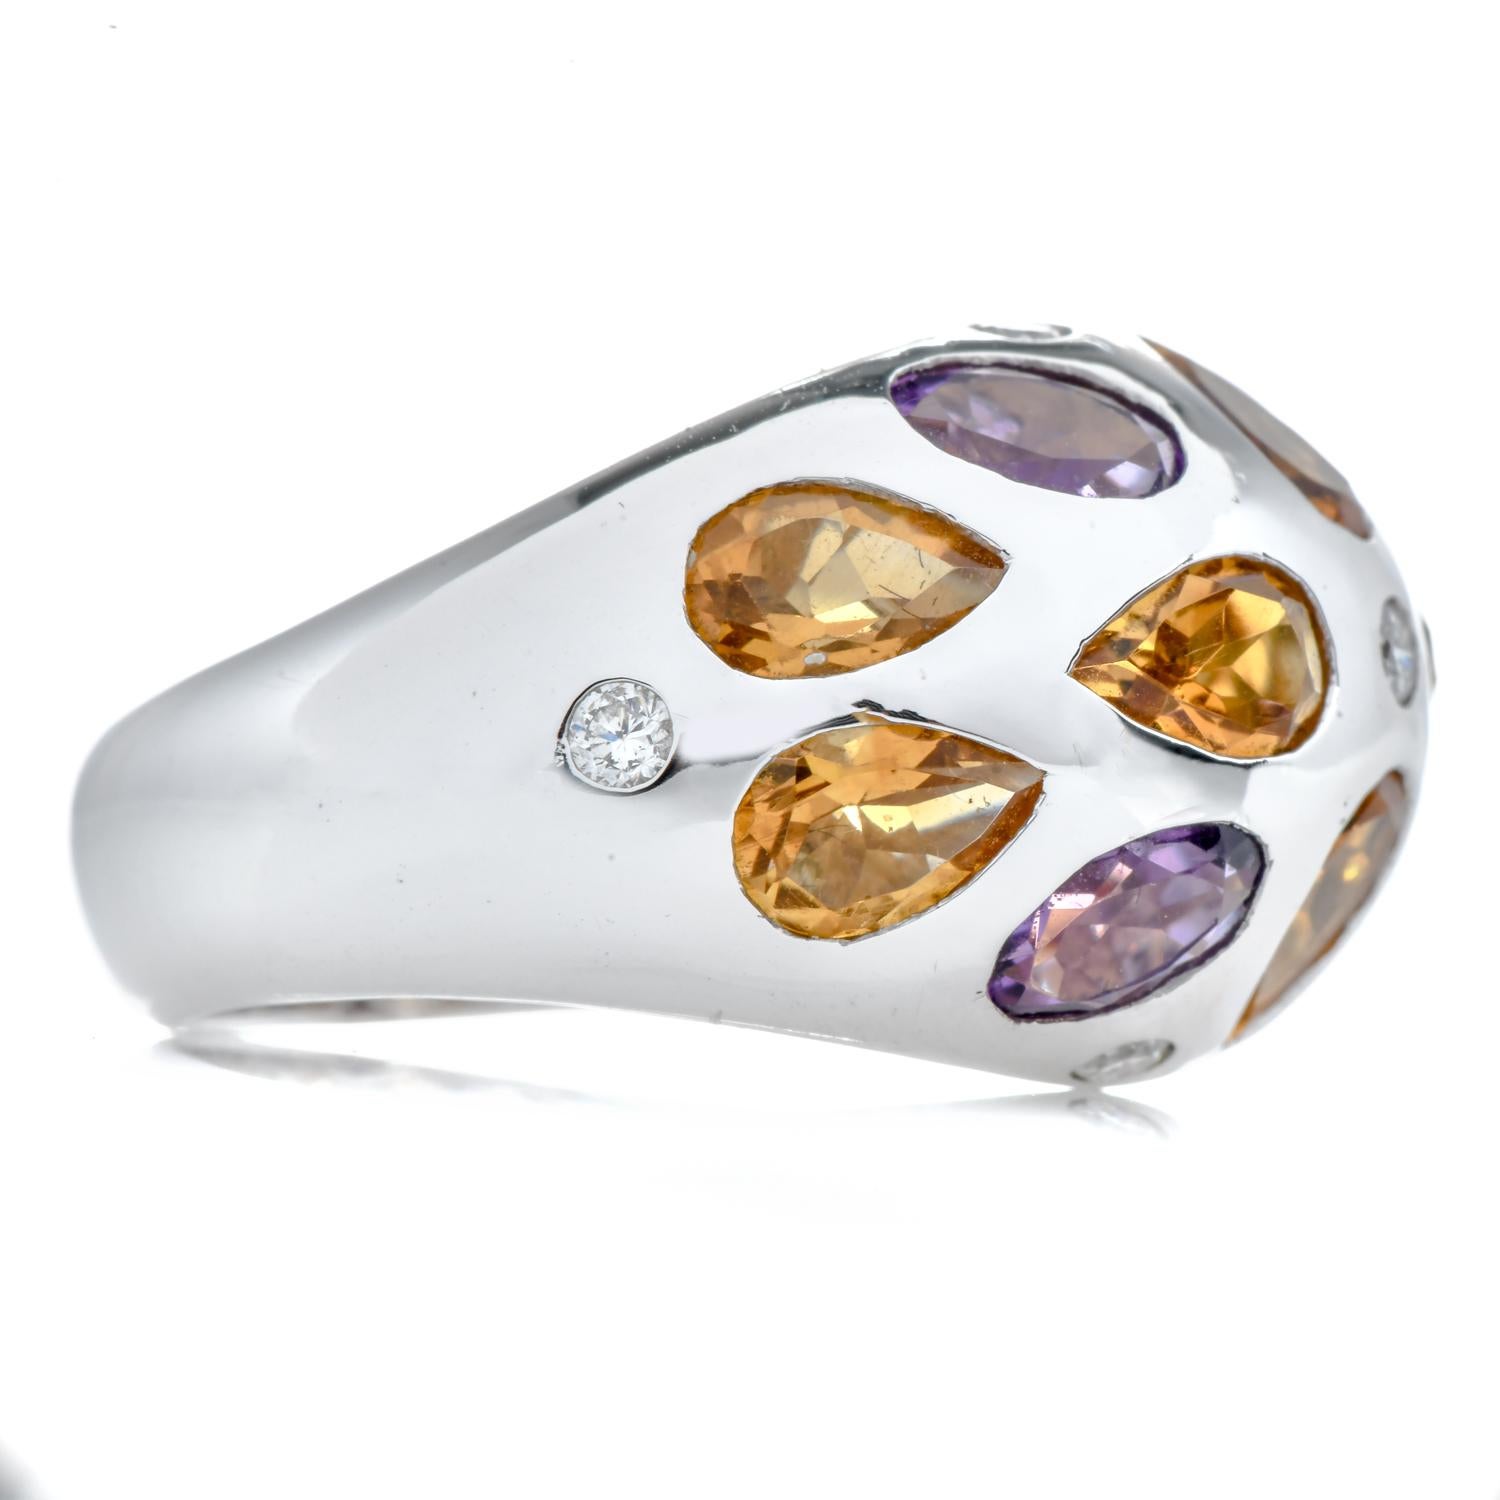 A Dome style Diamond Citrine Amethyst 18K White Gold Flower Dome Ring

This stunning ring is finely crafted in solid 18K White Gold. 

Displaying in (7) Round Cut, Genuine Daimond, flush set, collectively weighing 0.22 carats, G-H color, VS